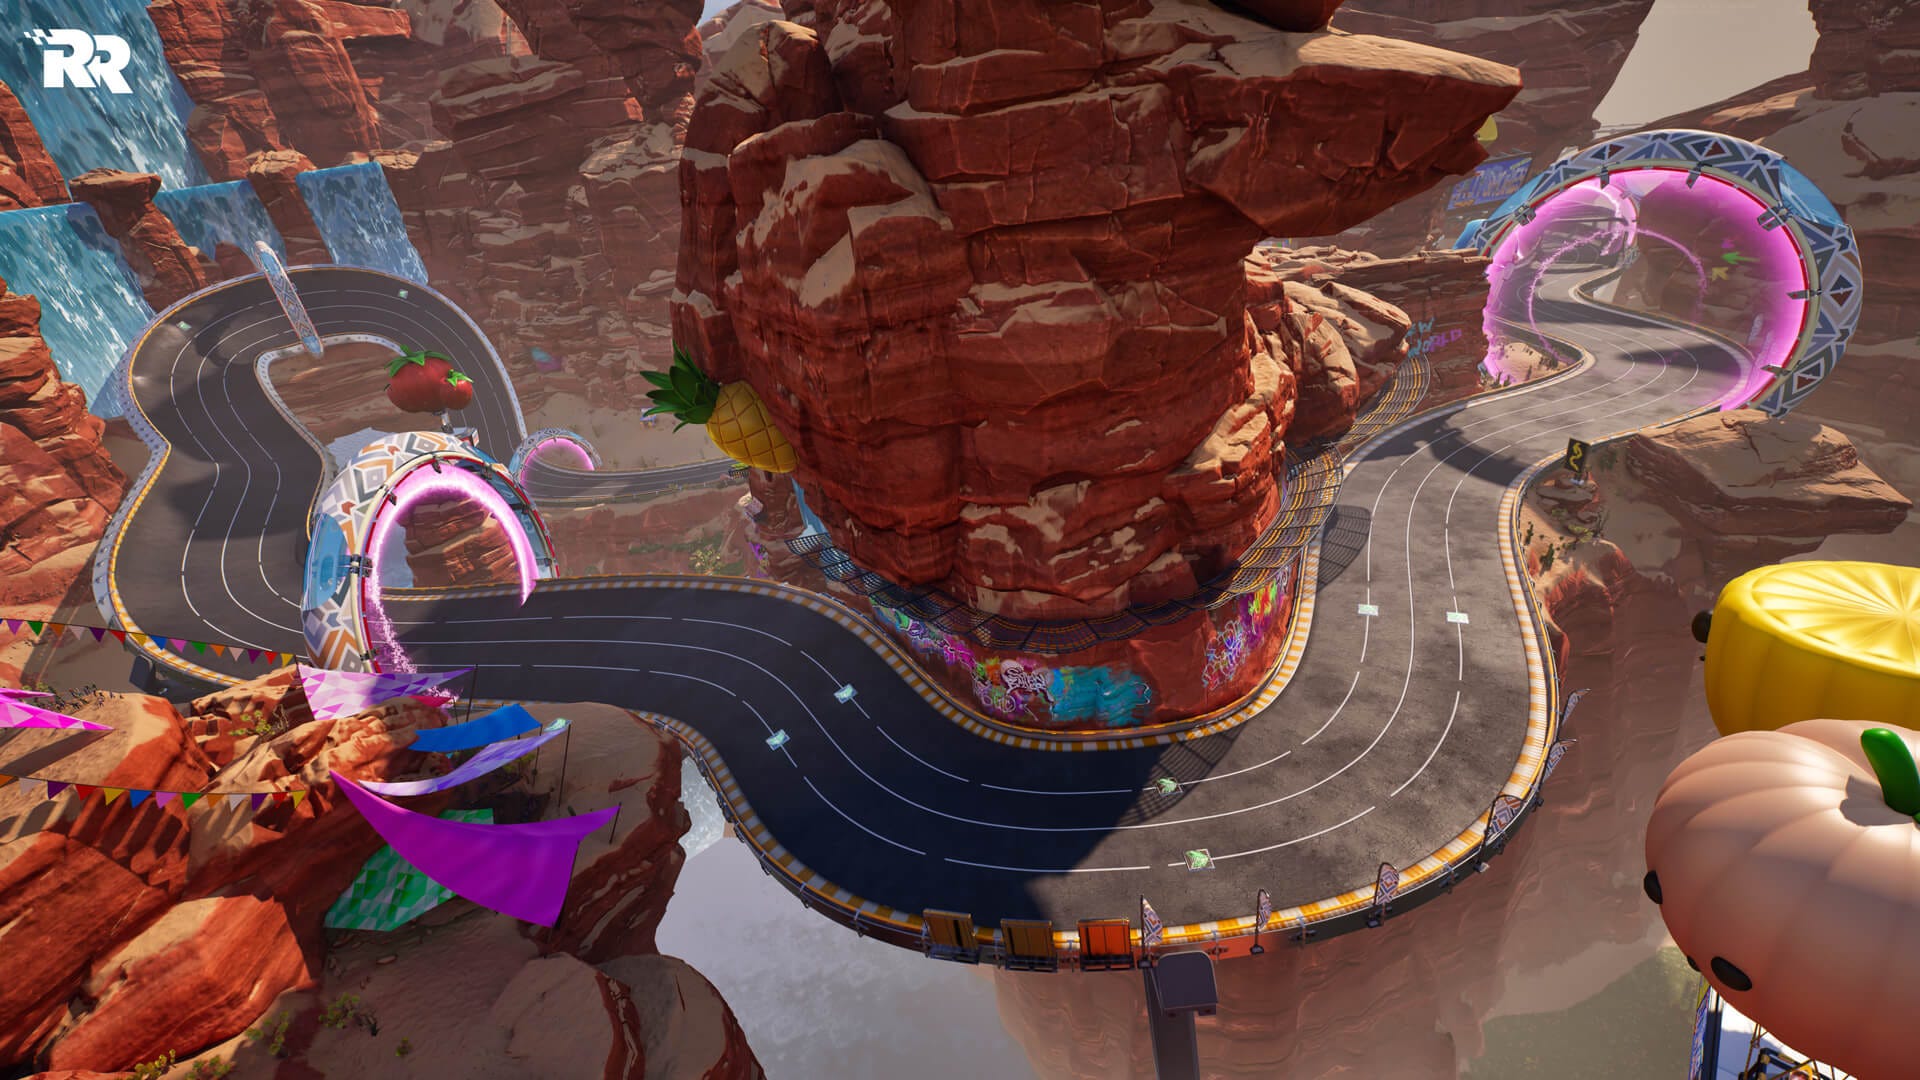 Fortnite's Rocket Racing is a fun mix of Rocket League and Mario Kart